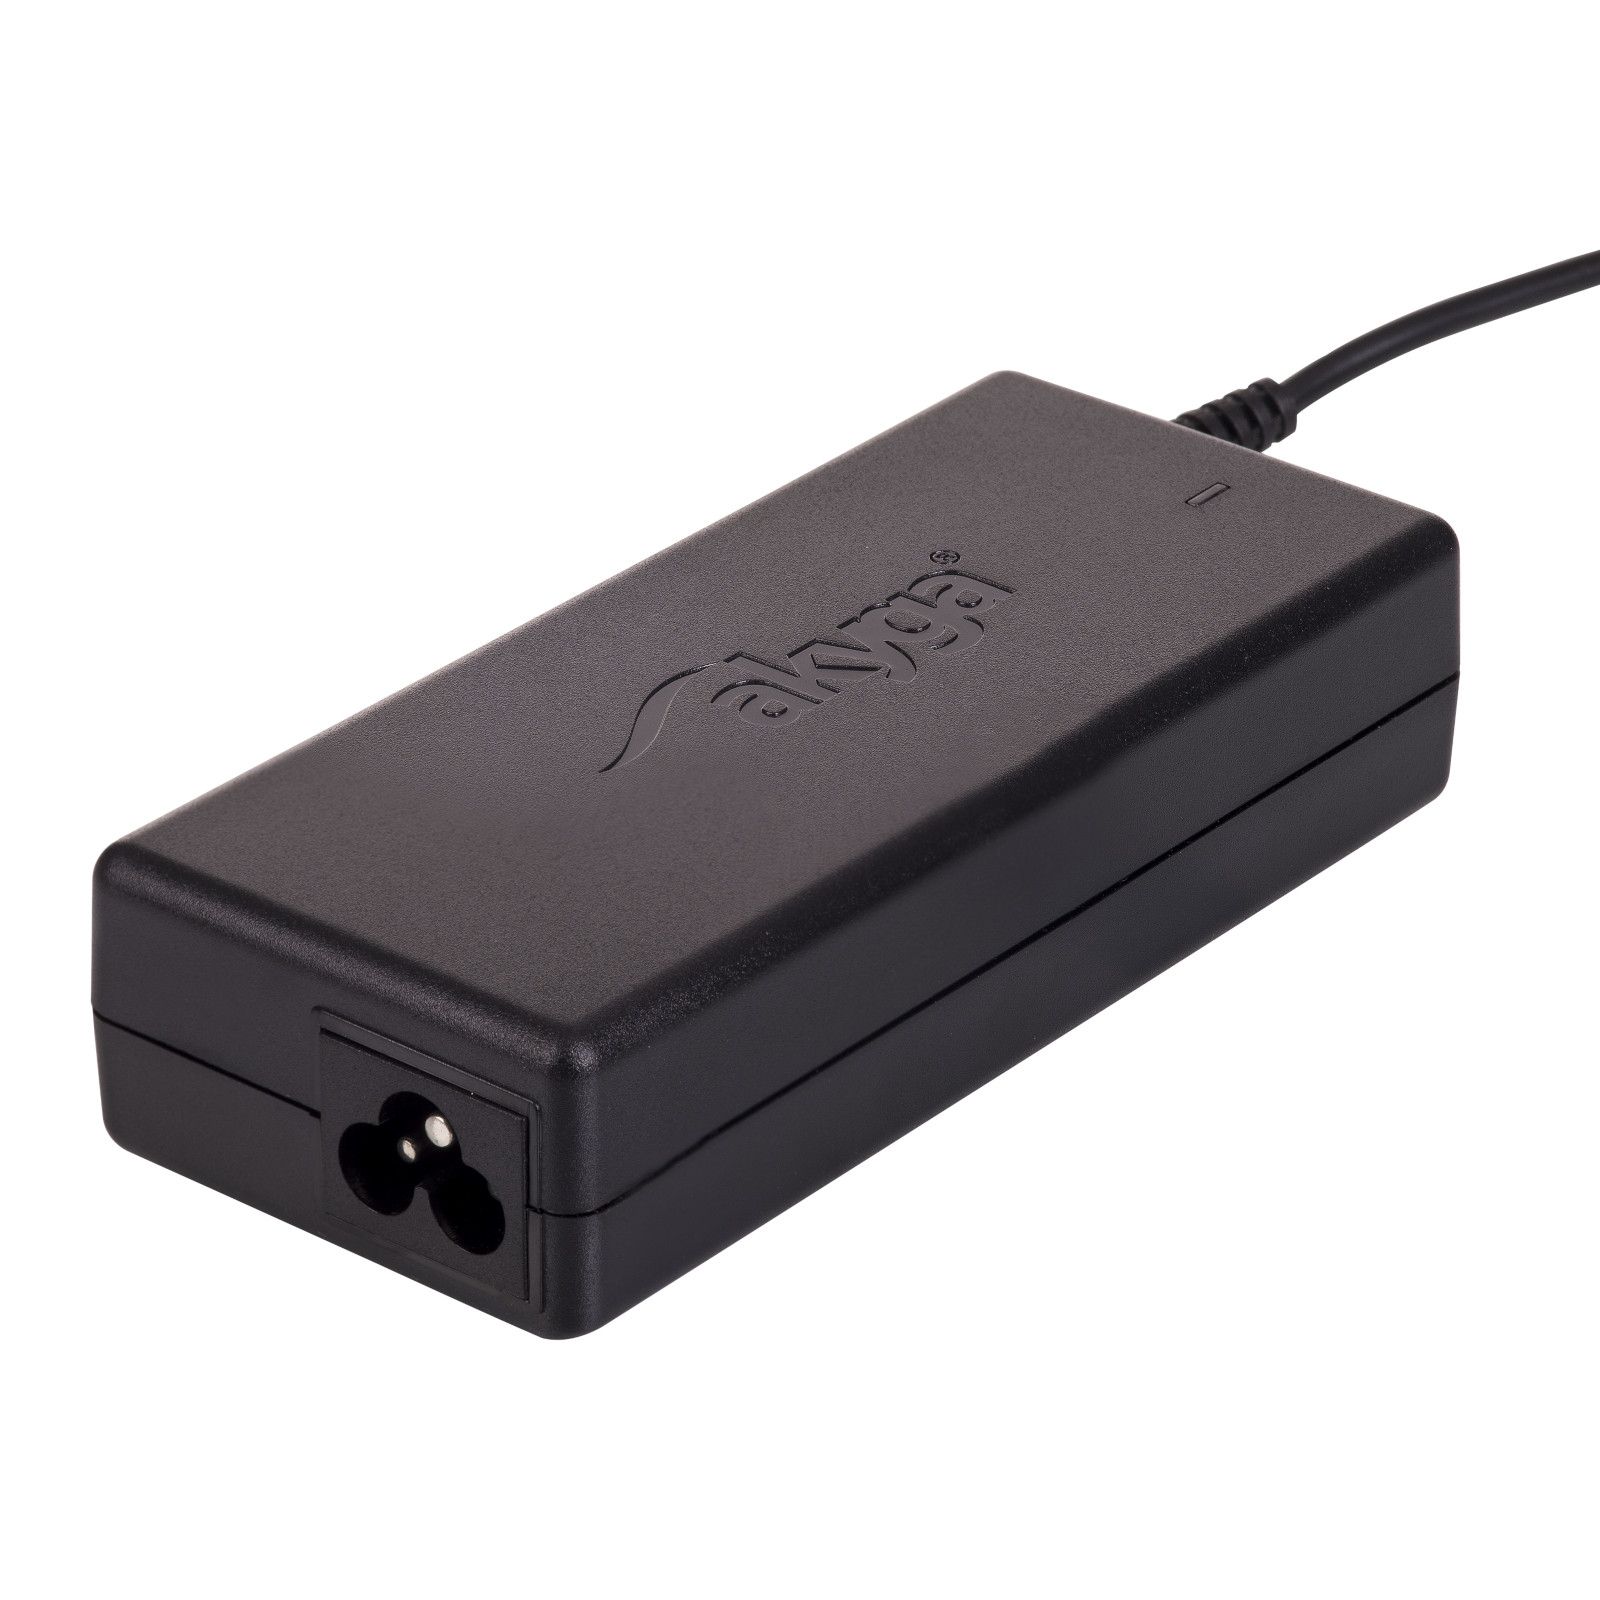 Akyga notebook power adapter AK-ND-08 19V/4.74A 90W 4.8x1.7 mm HP power adapter/inverter Indoor Black_2